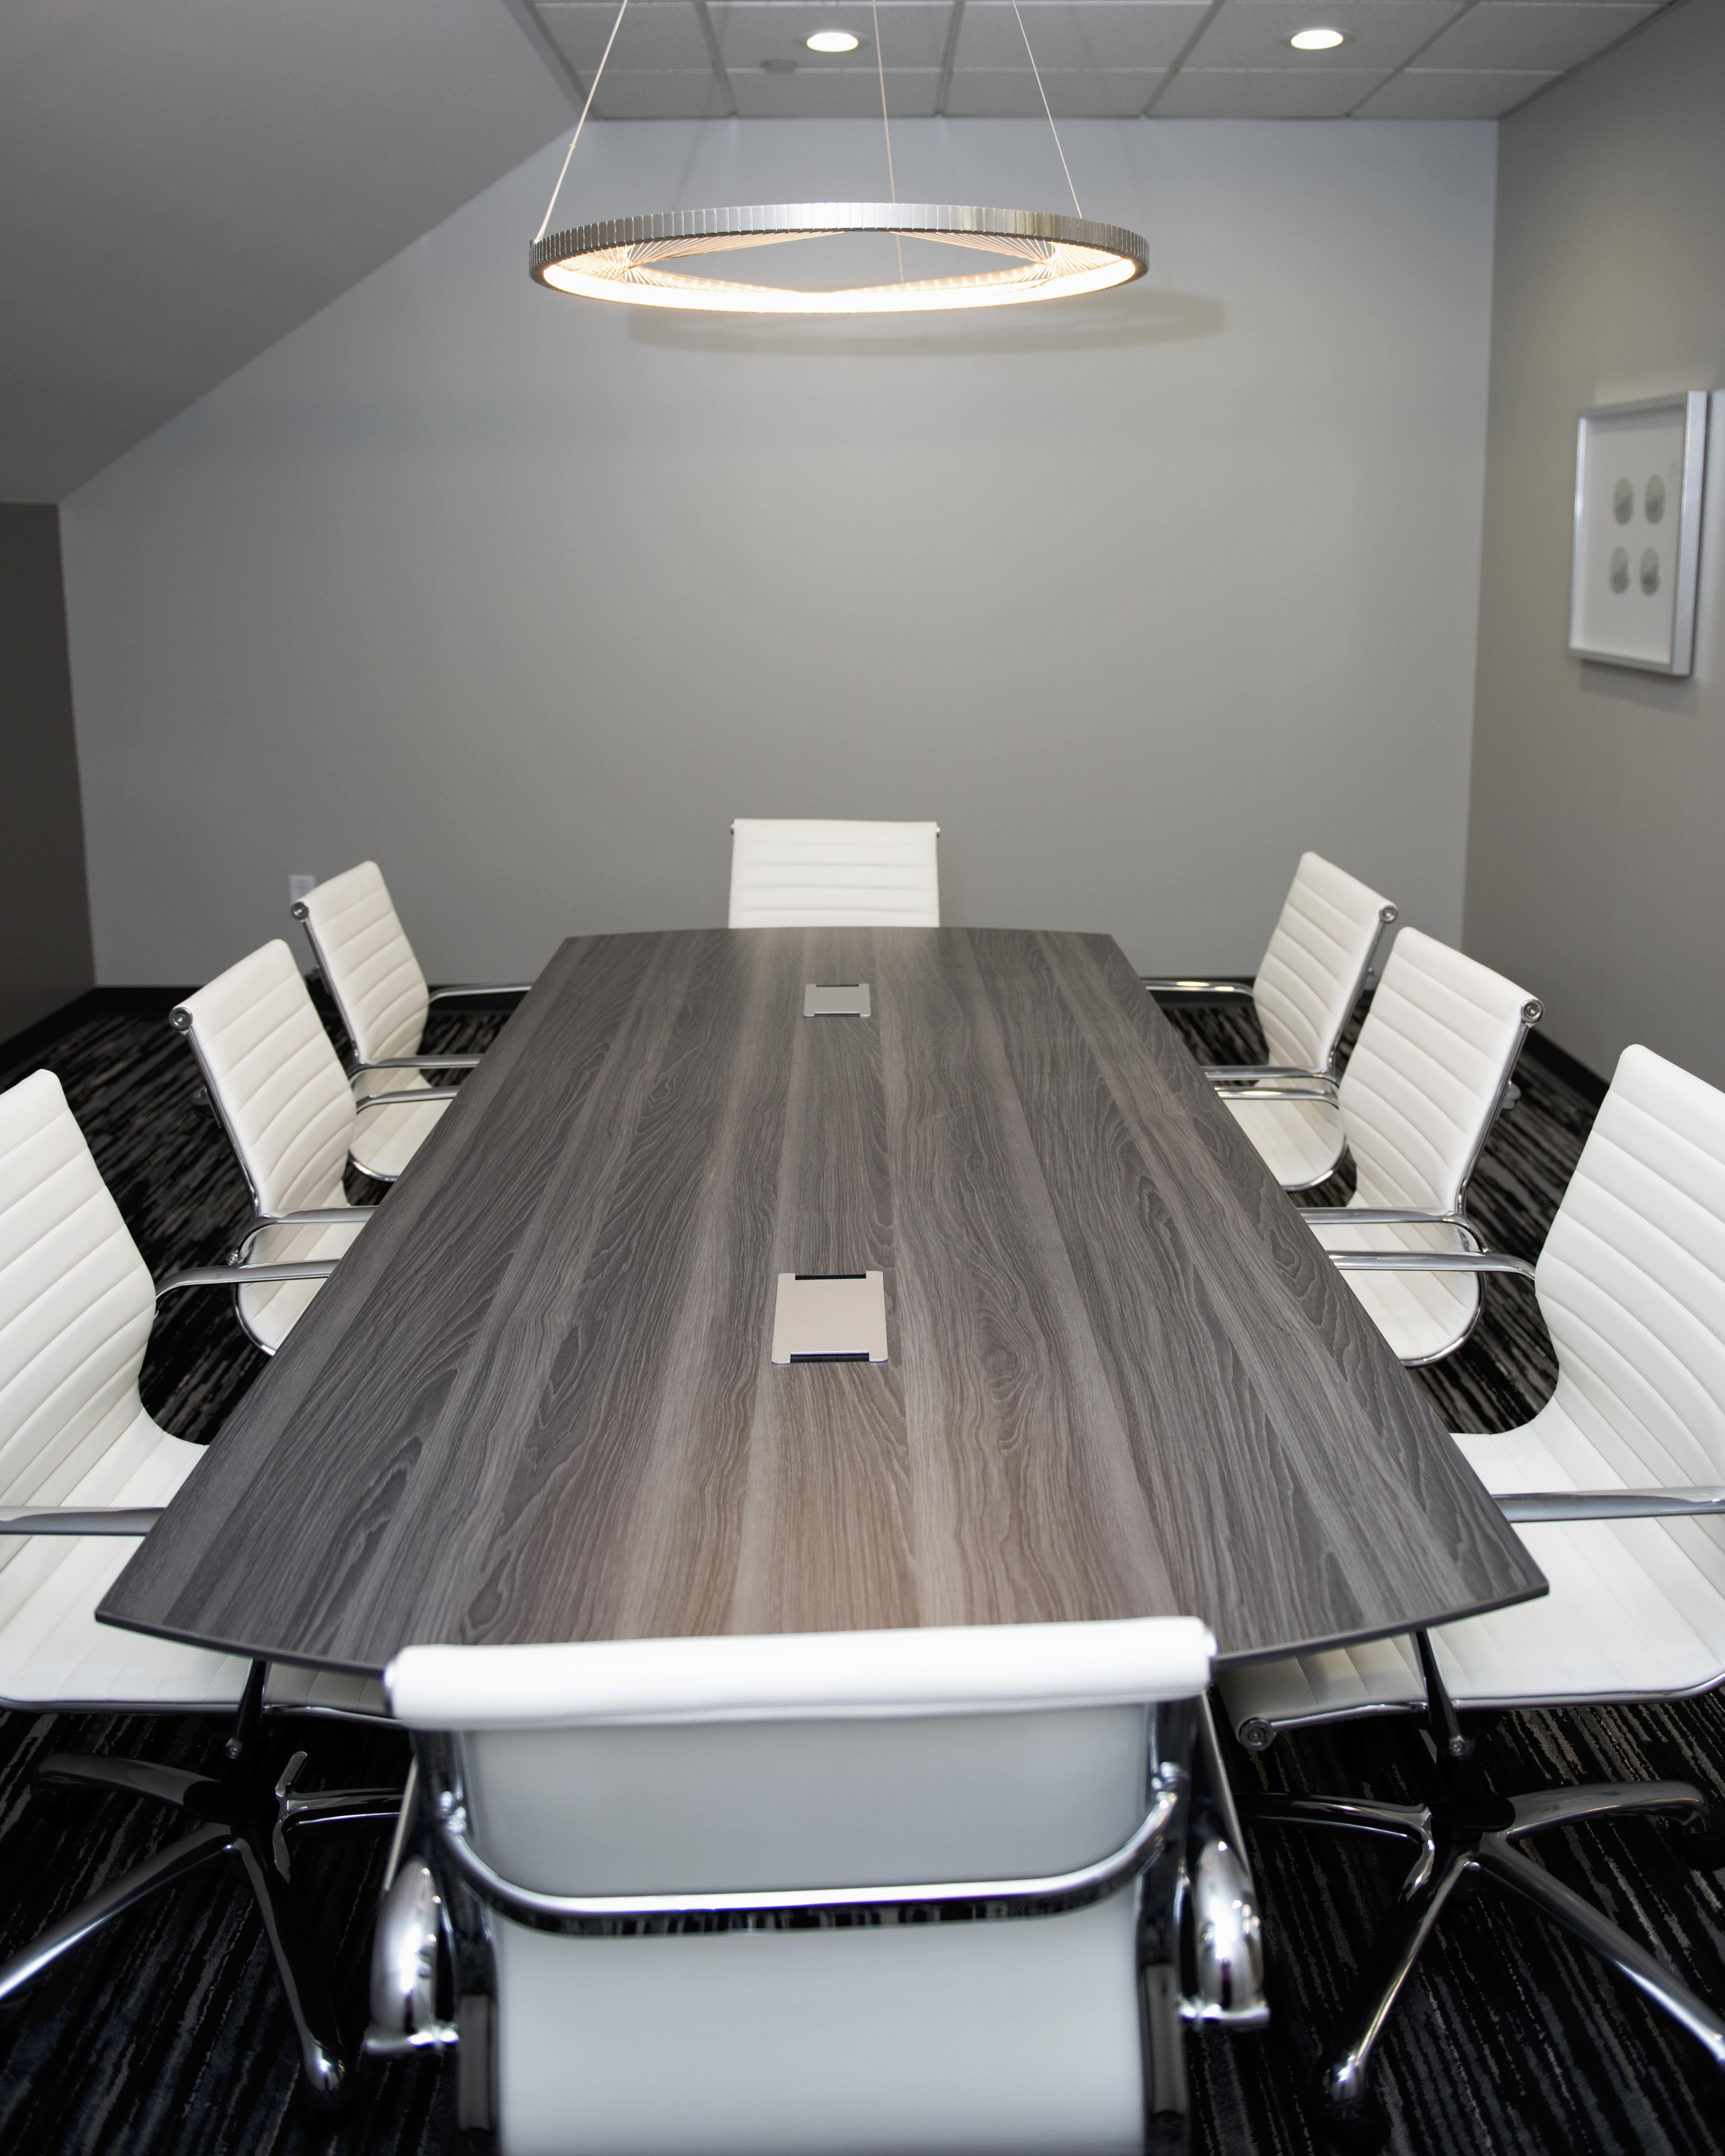 Well-decorated board room